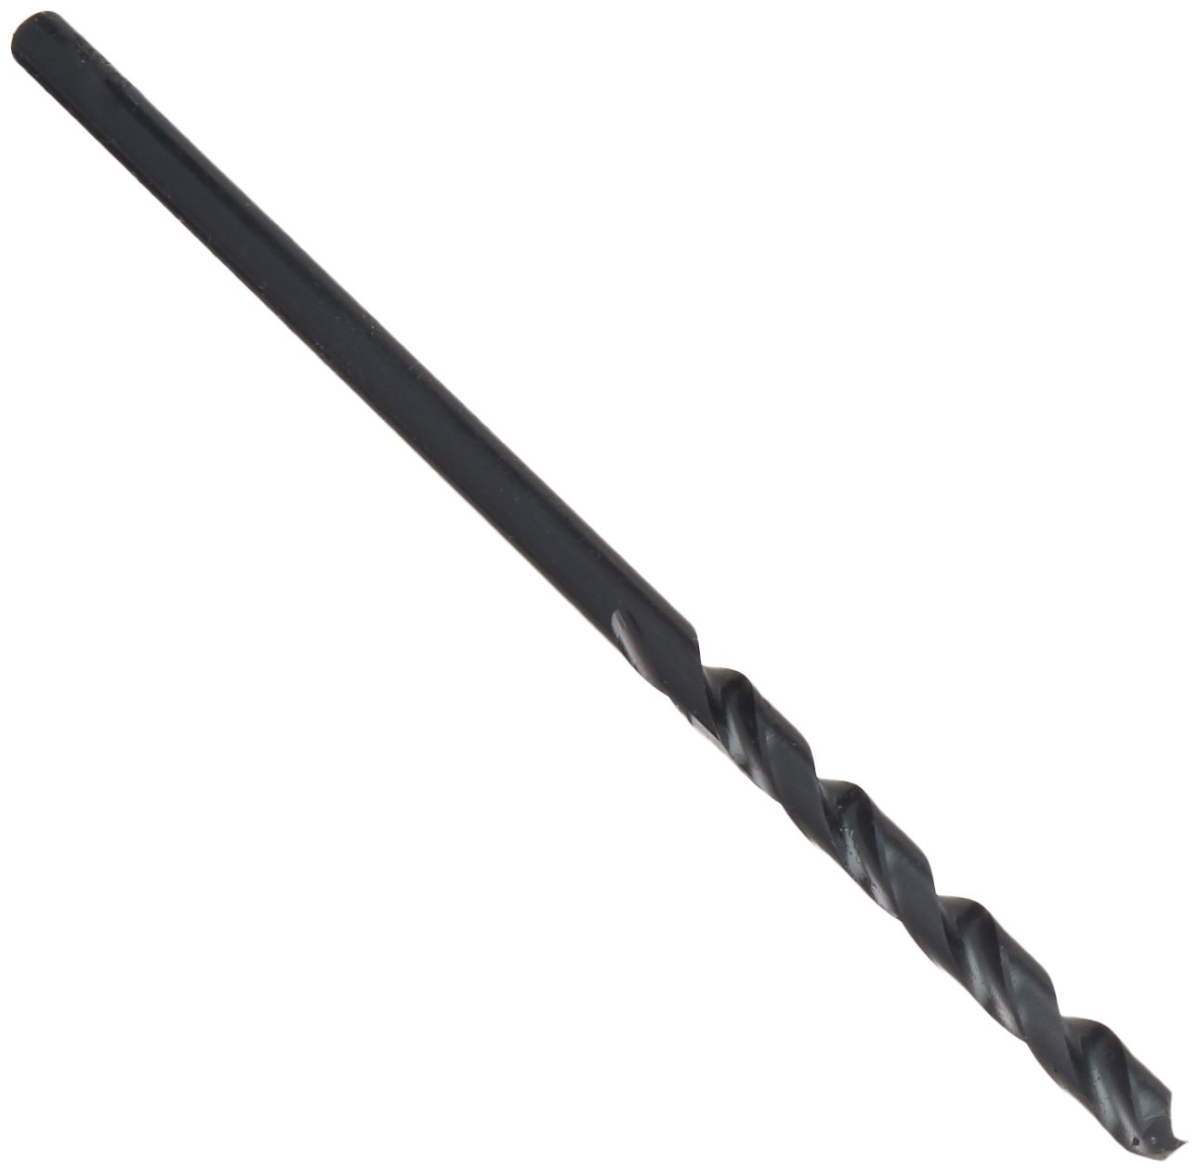 6 In. Single Black Oxide High-speed Steel Drill Bit With Aircraft Extension